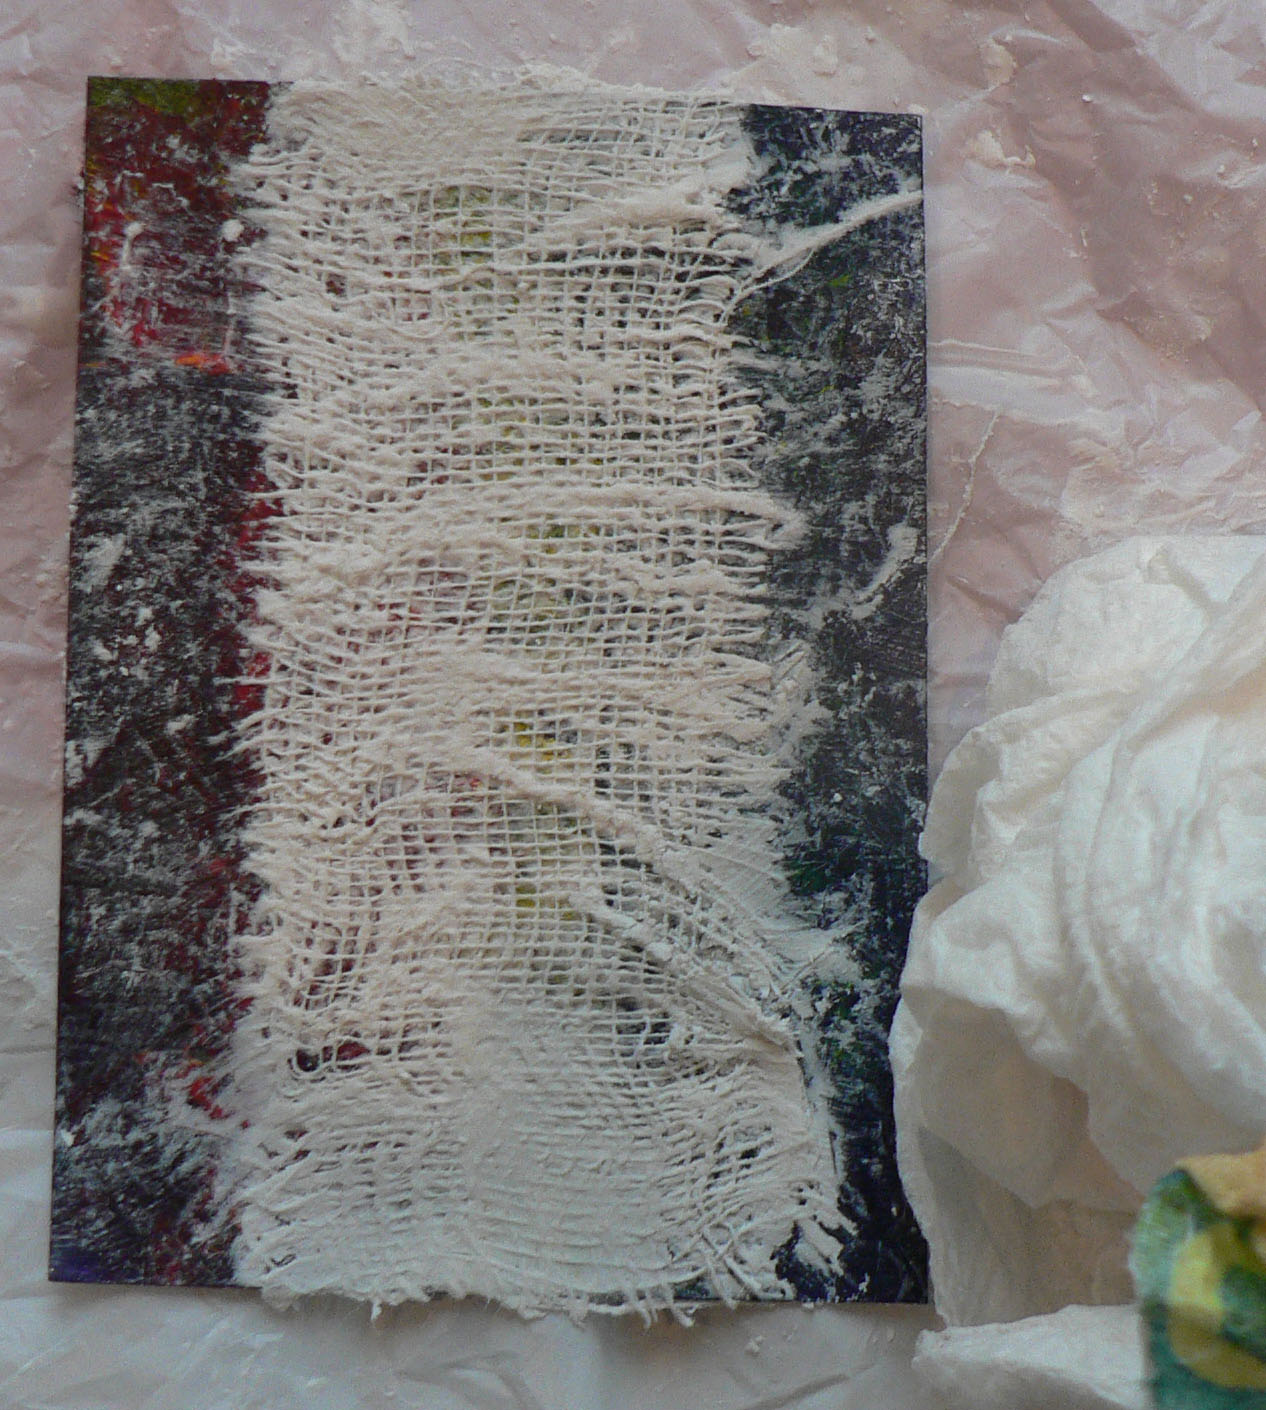 Creative Expressions: Book Study - Plaster Gauze